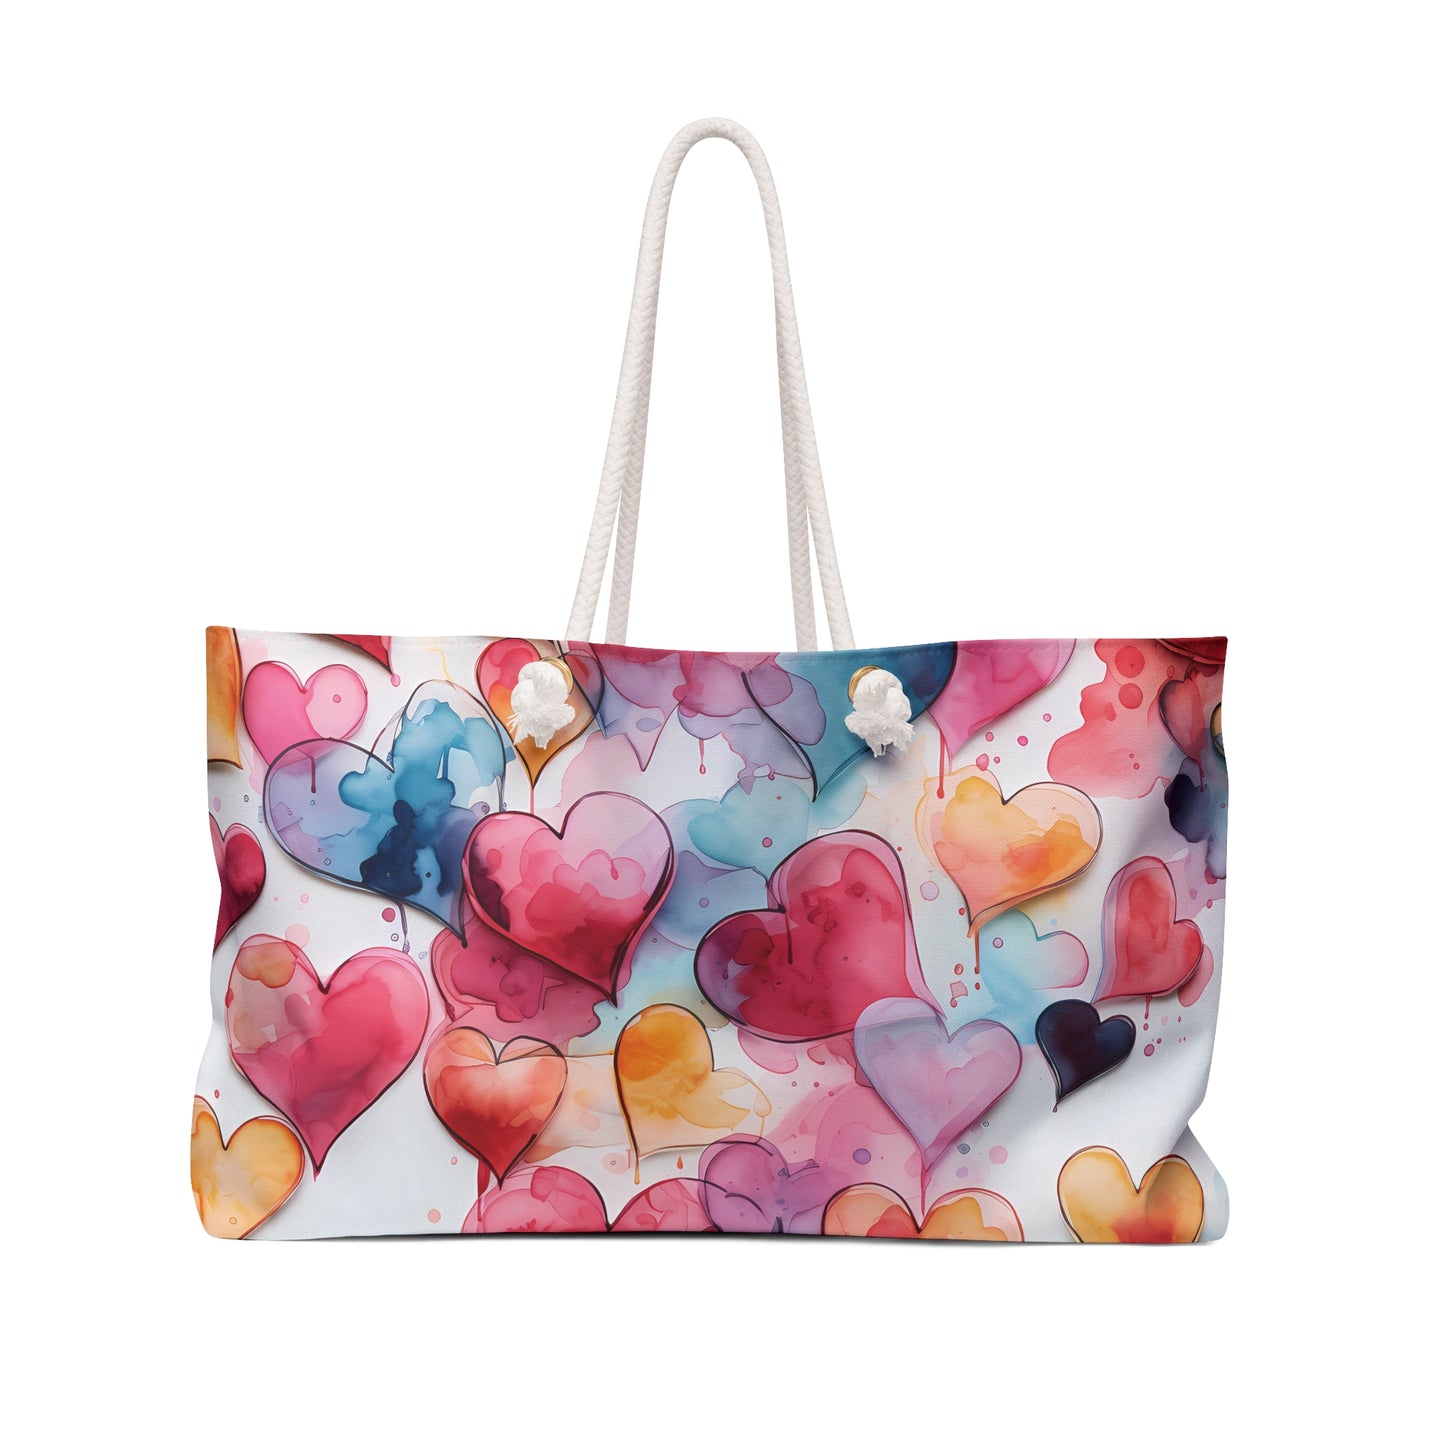 watercolor heart bag perfect for weekends